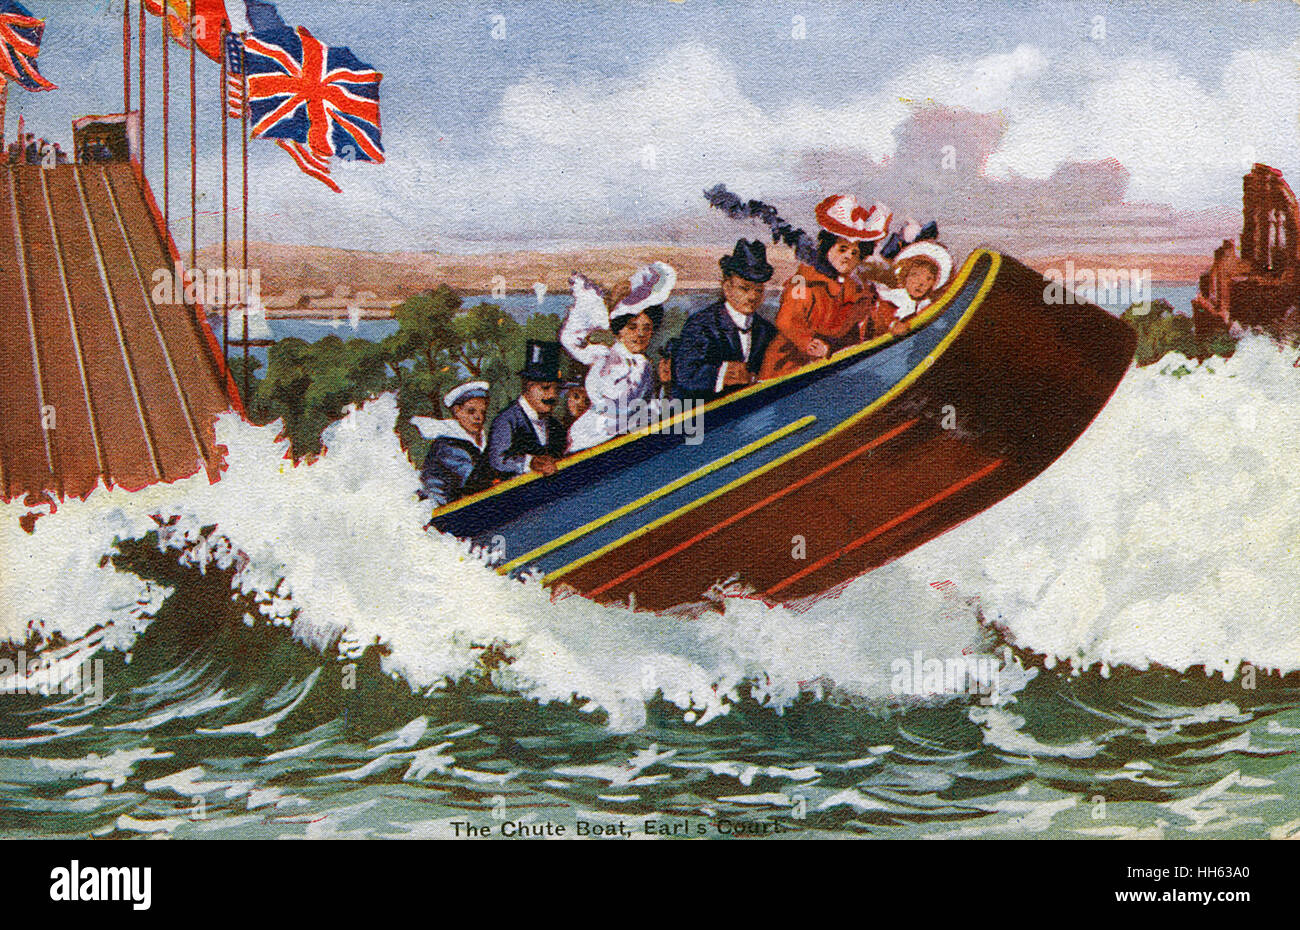 Earl's Court Exhibition, London - The Chute Boat Ride Stock Photo